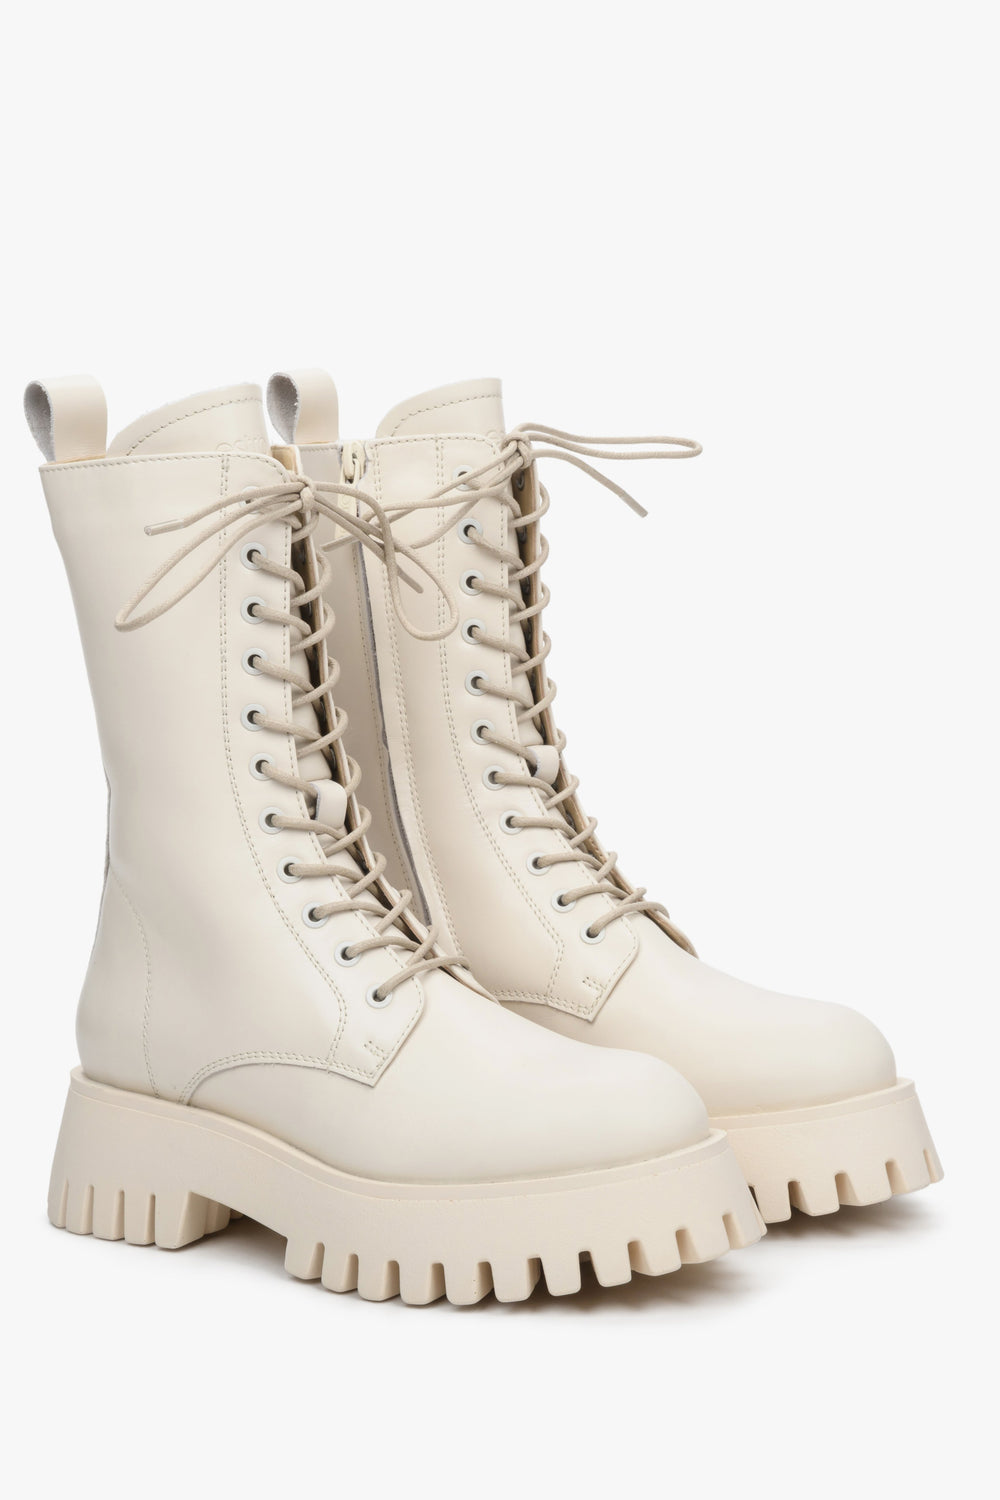 Women's Light Beige High Lace-up Boots made of Genuine Leather Estro ER00112274.